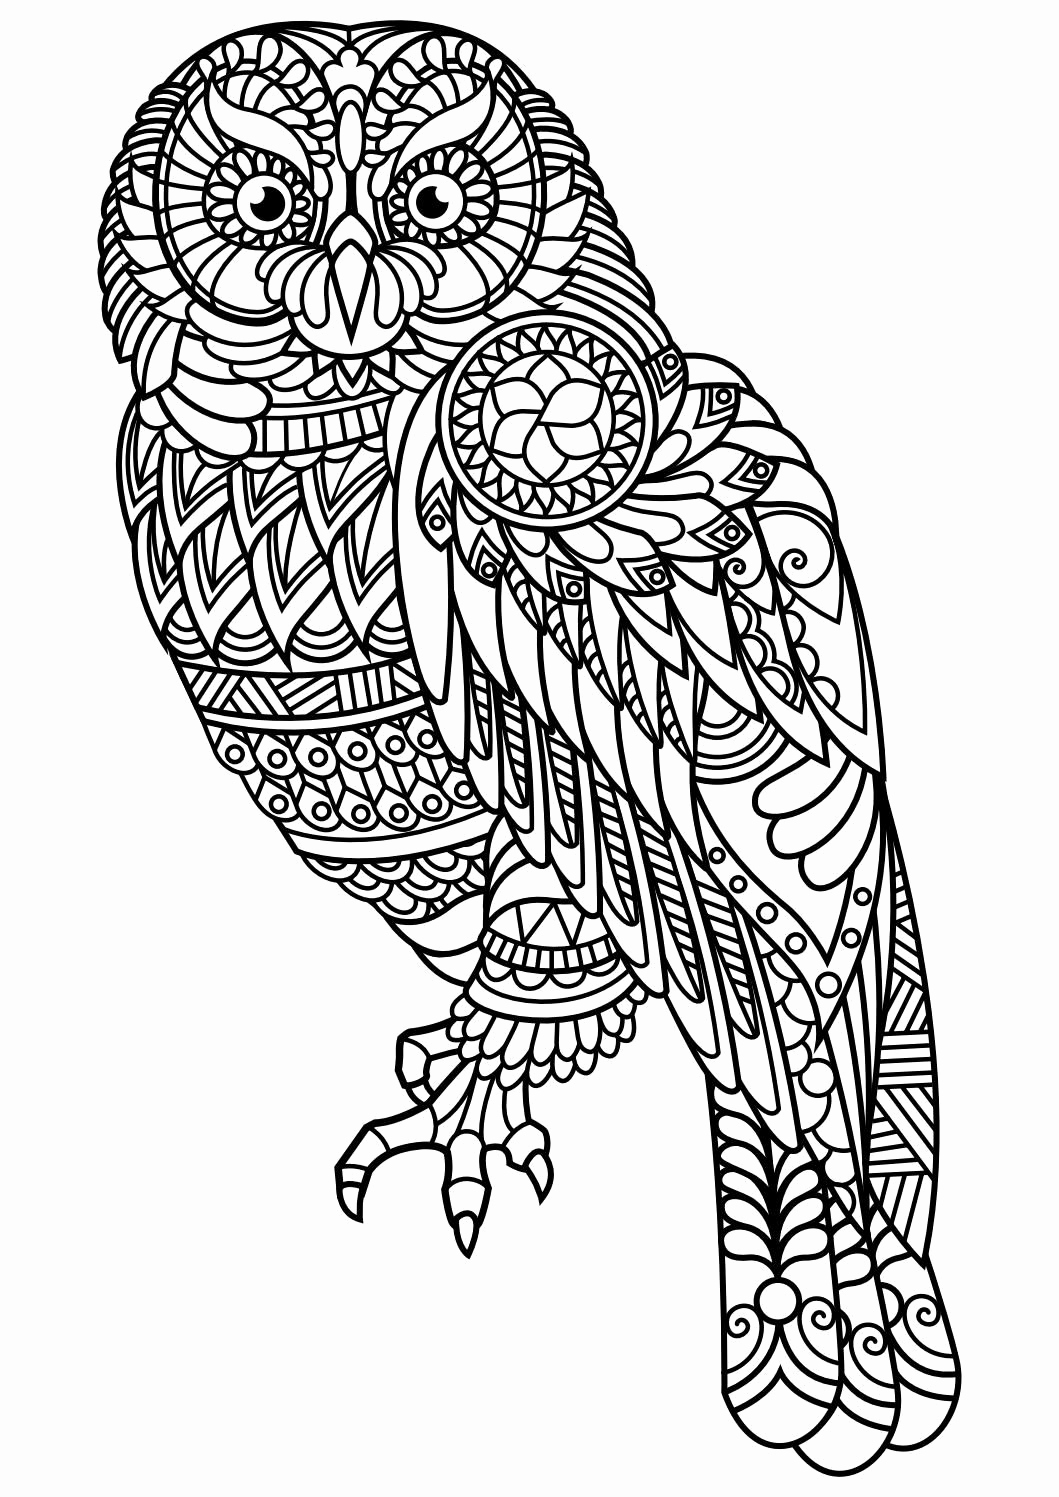 Difficult Animal Coloring Pages at GetColorings.com | Free ...